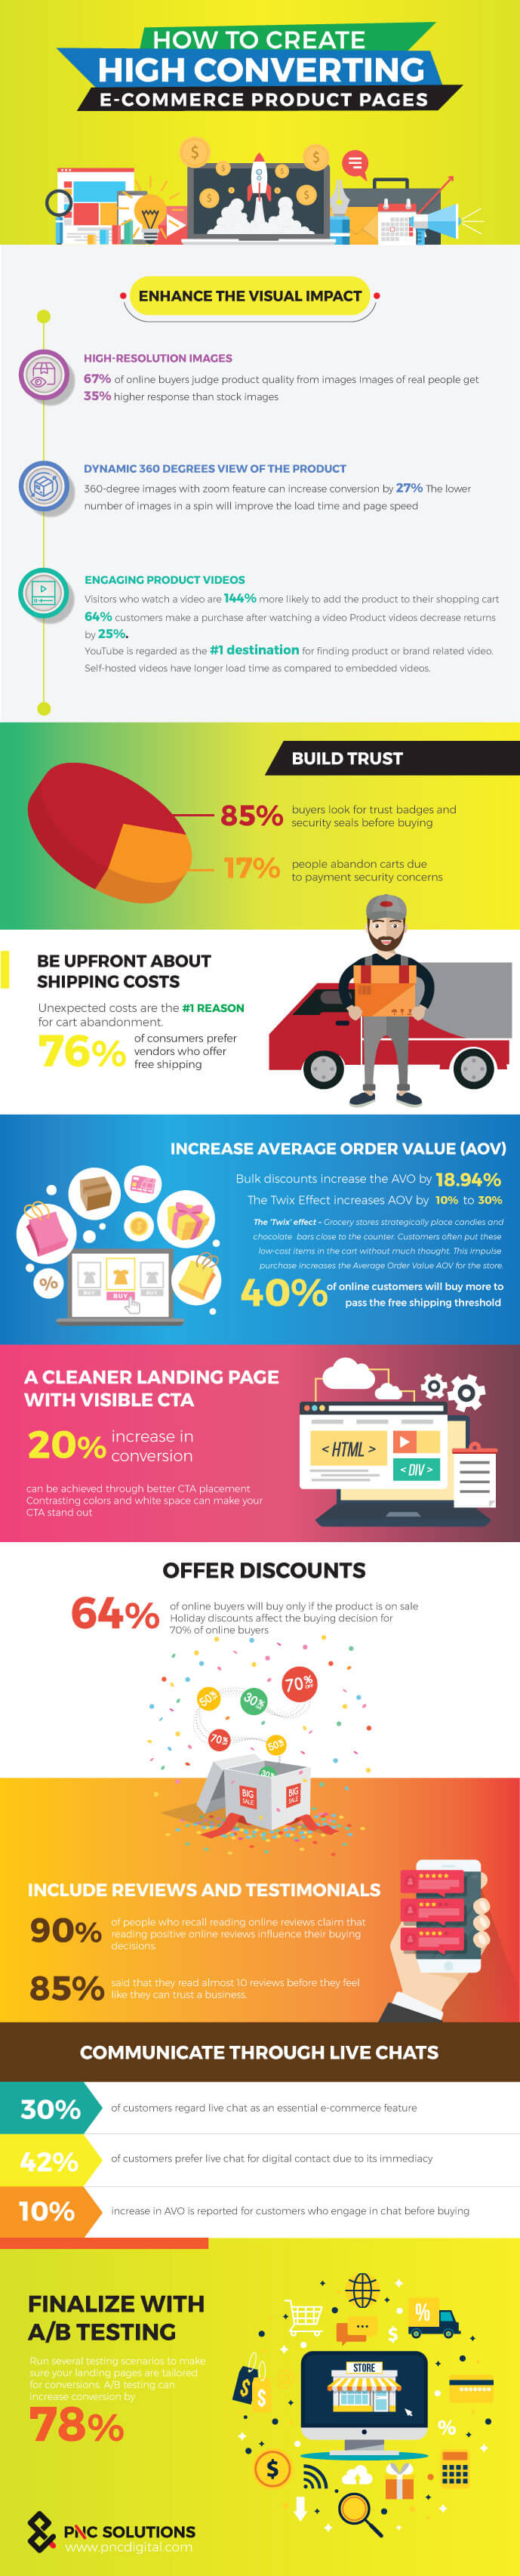 how to create high converting ecommerce product pages infographic